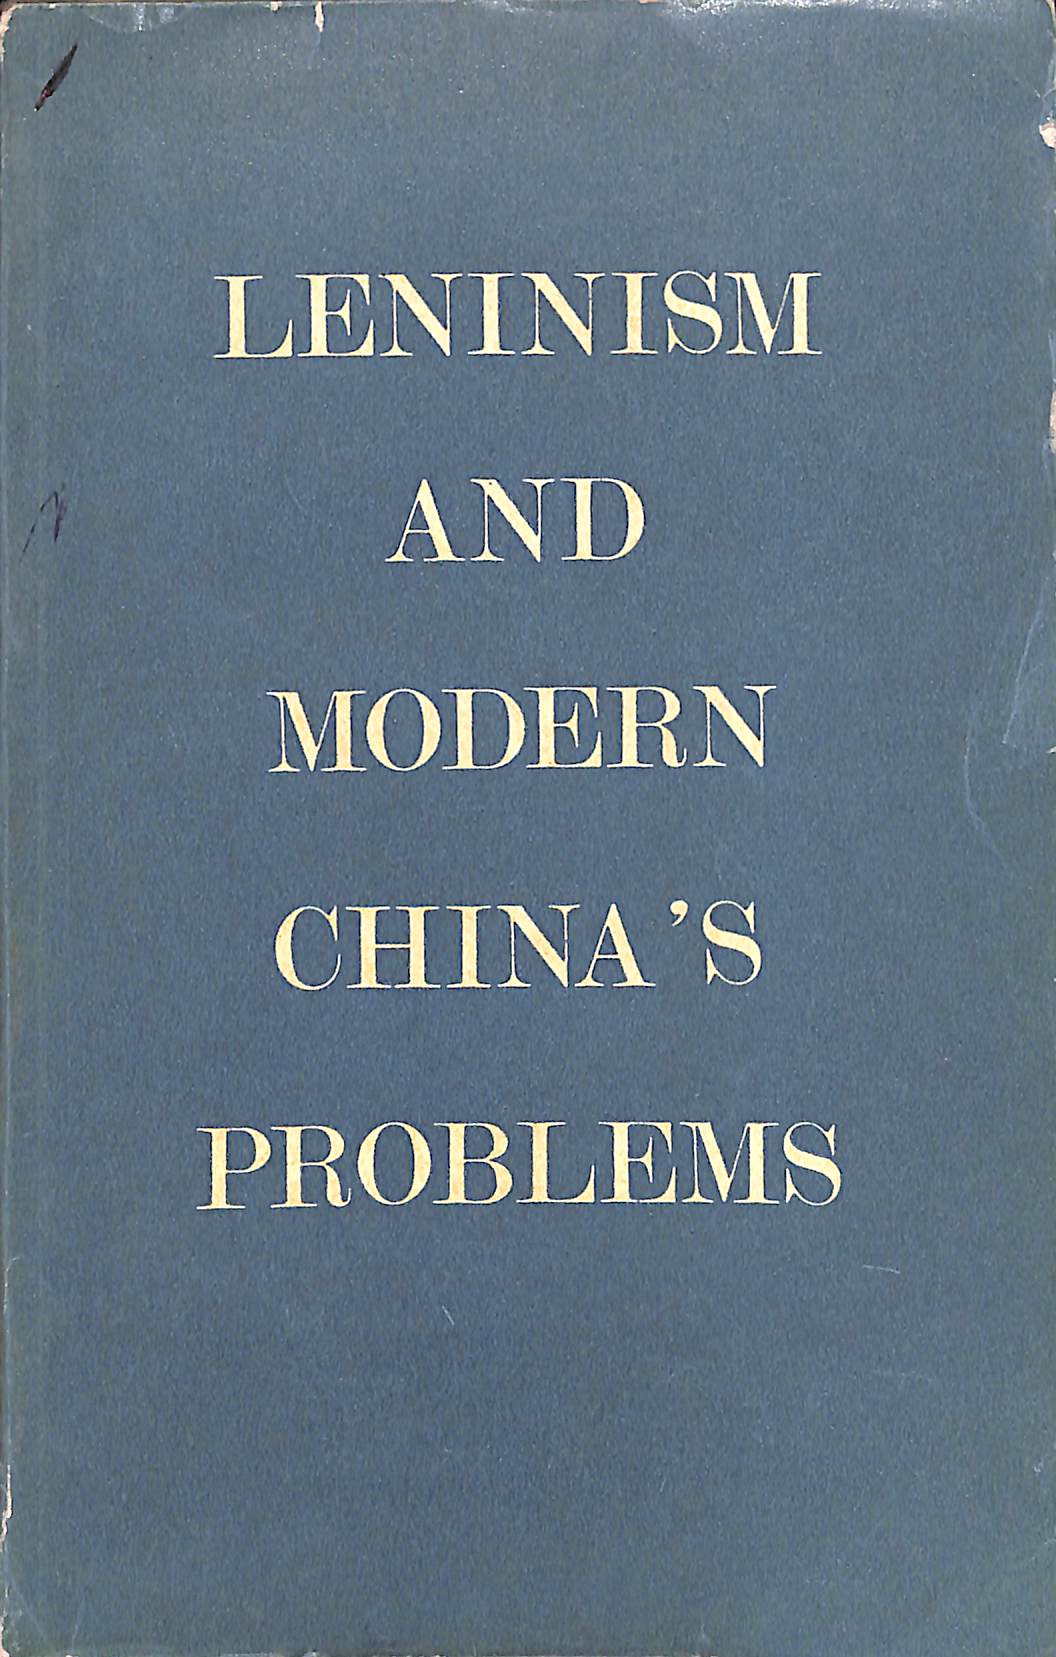 Leninism and modern china's problems